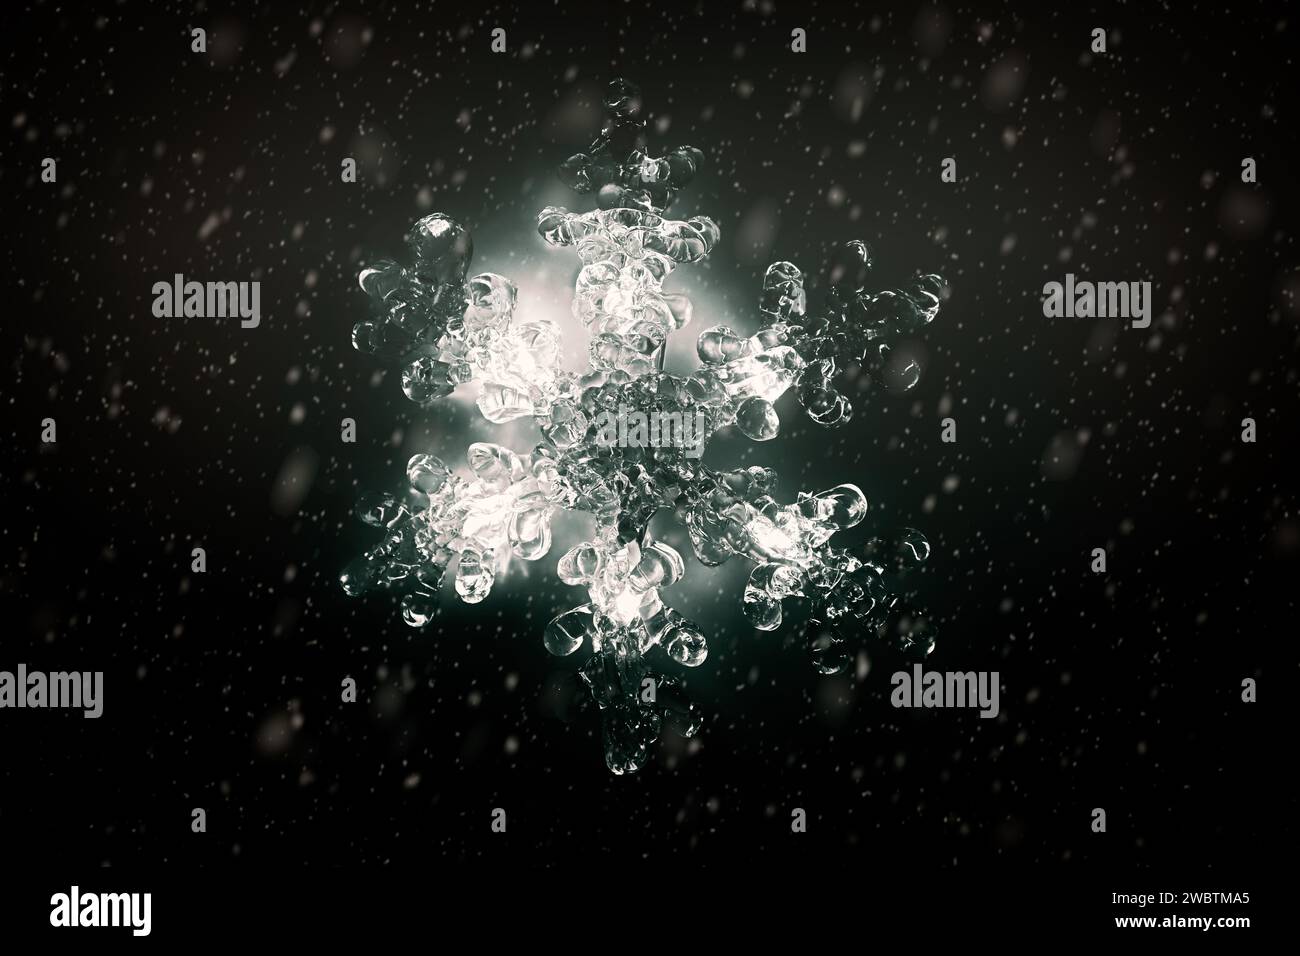 Decorative Christmas light in shape of a snowflake illuminated against dark background. Monochrome conversion, added snowfall effect. Stock Photo